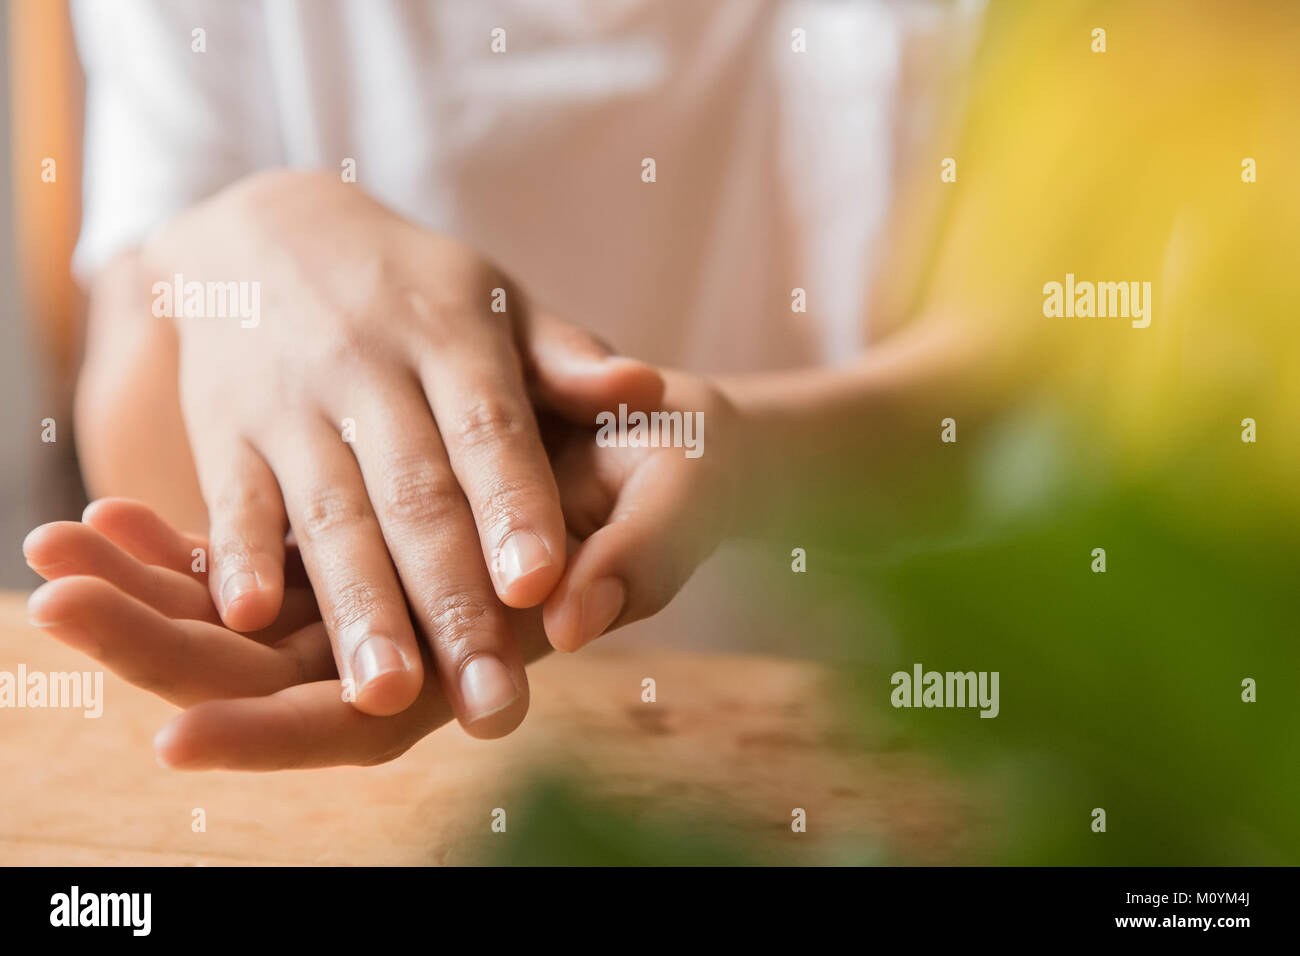 Hands of African American woman Stock Photo